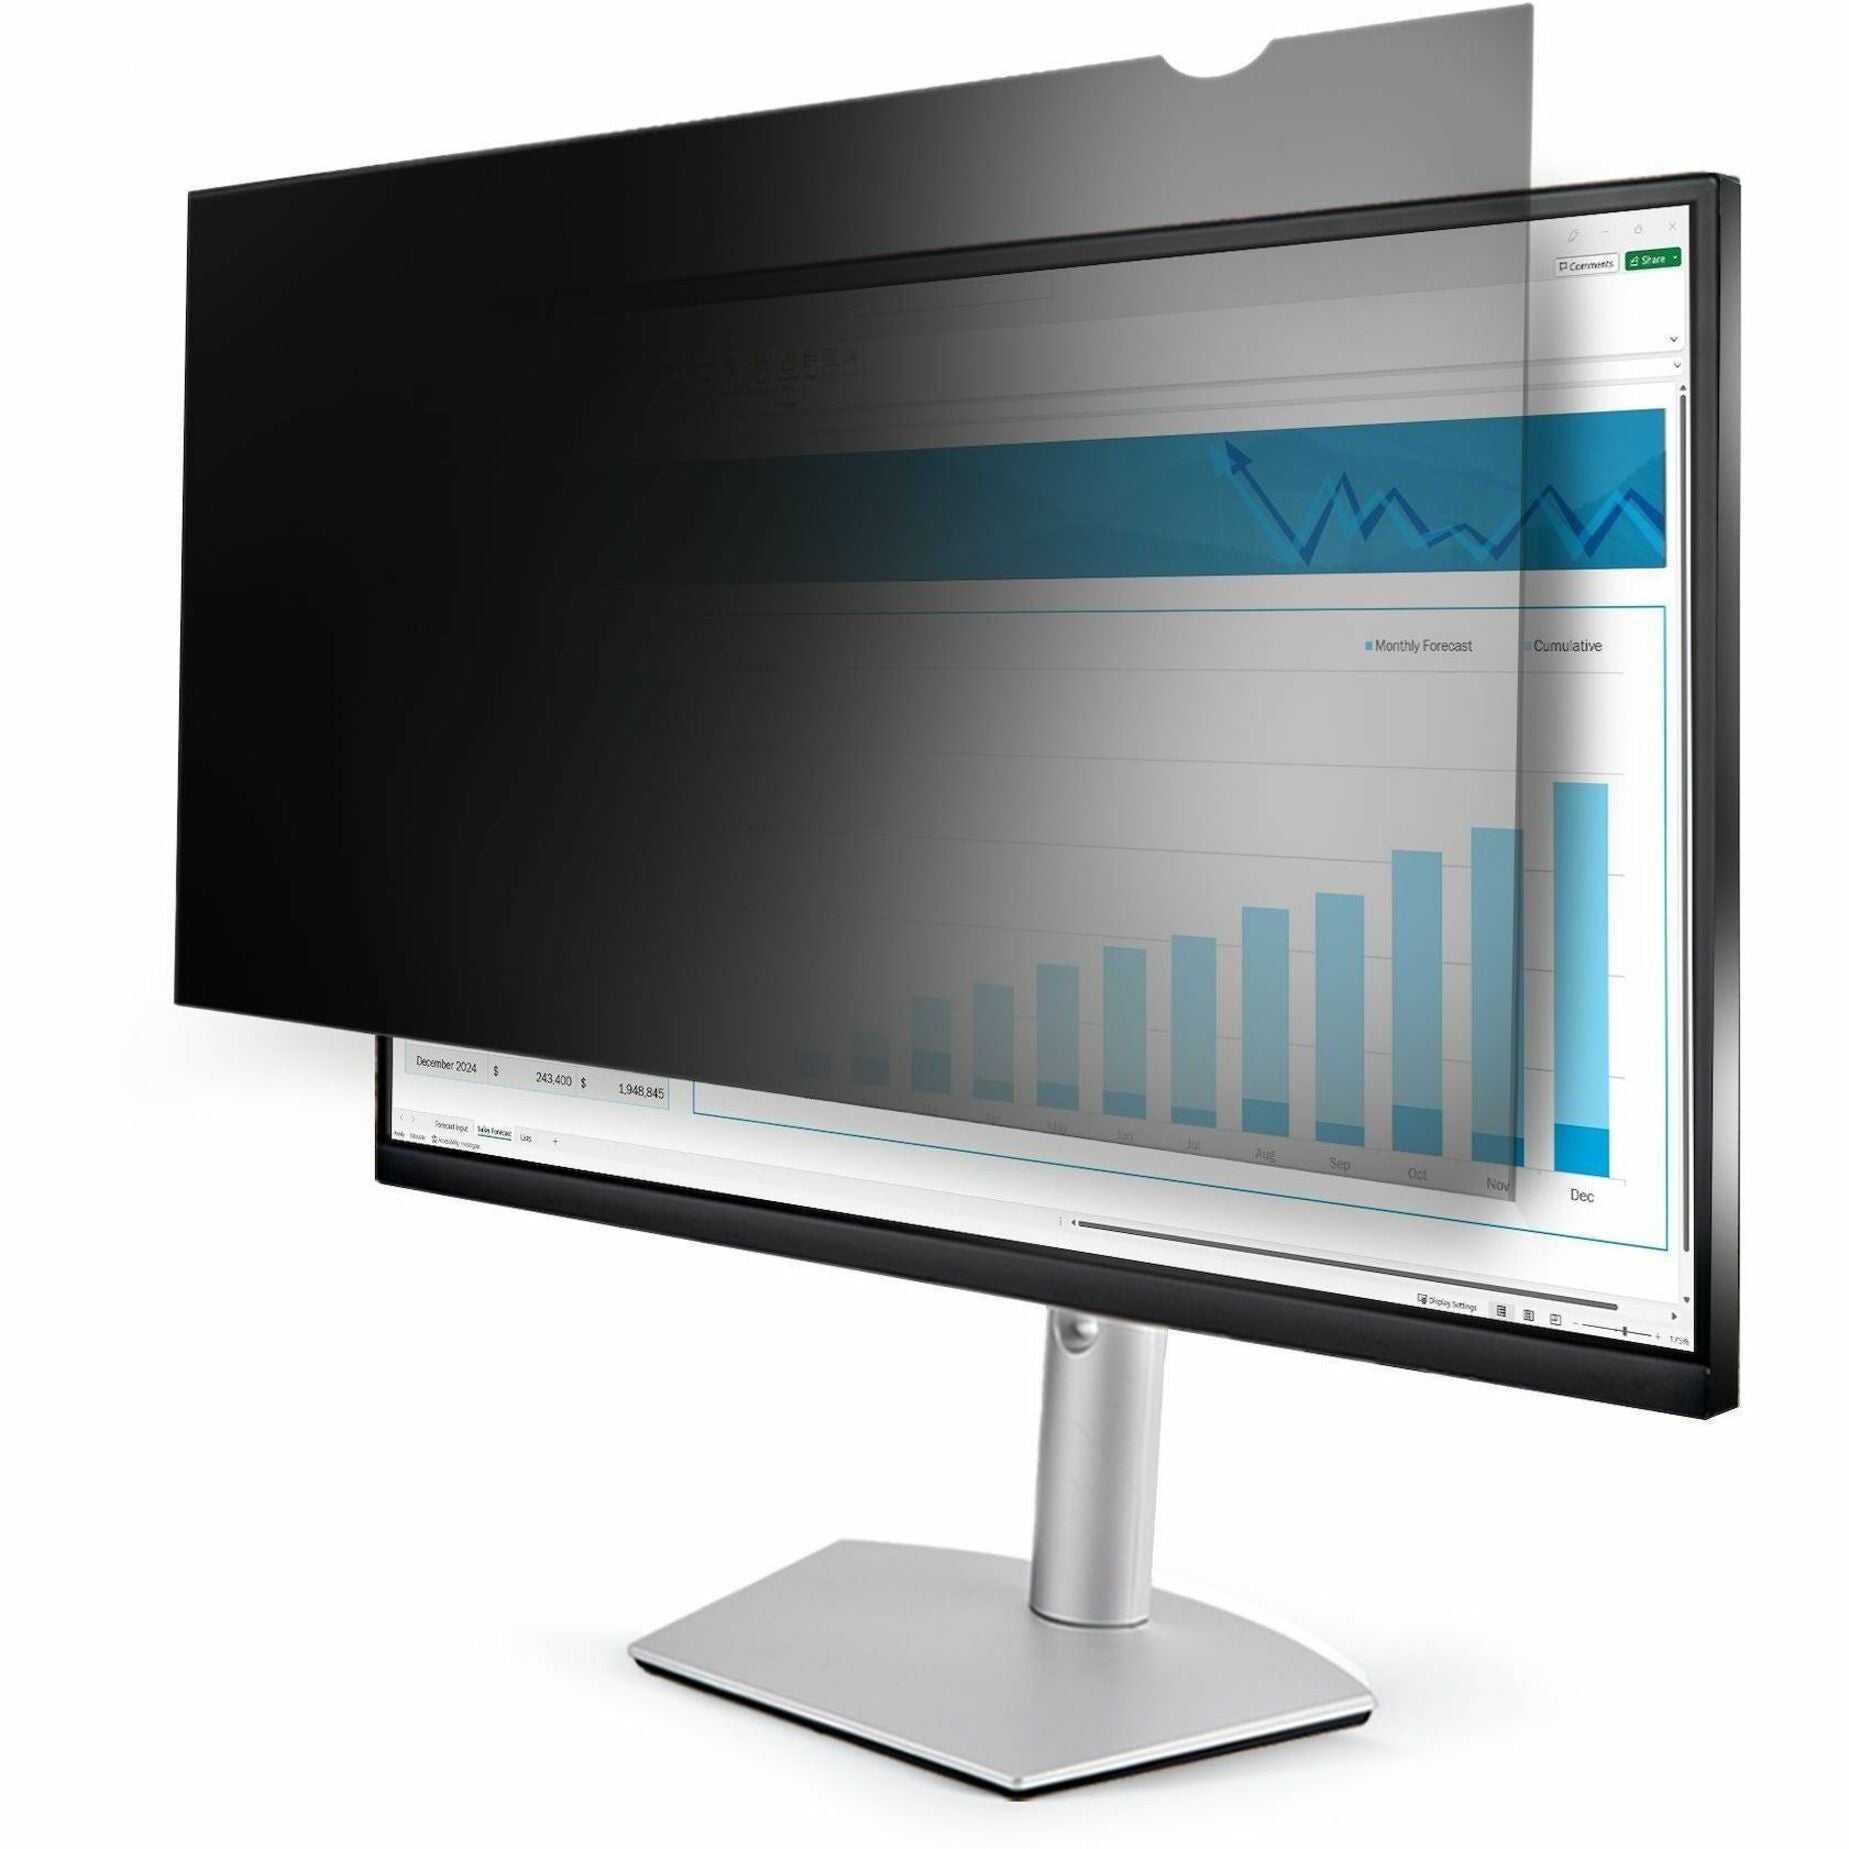 StarTech.com 23669-PRIVACY-SCREEN Privacy Screen Filter, Reversible Matte-to-Glossy, Easy to Remove, Blue Light Reduction, 23.6" Monitor